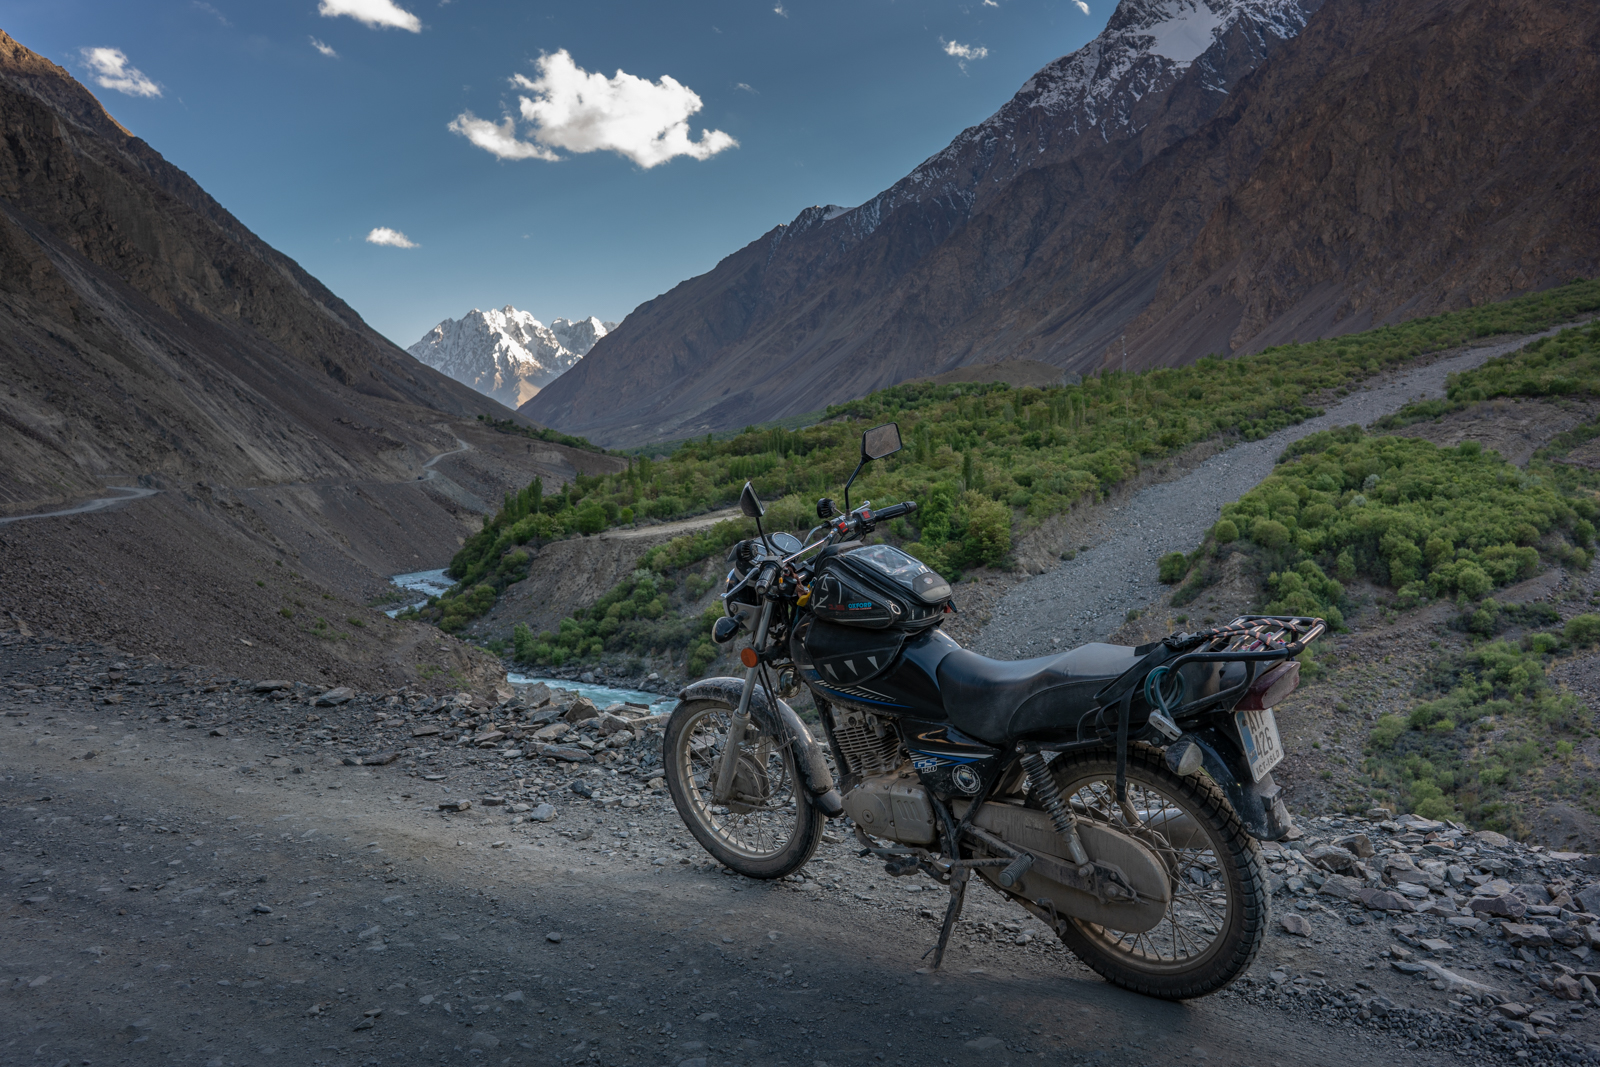 Pakistan adventure motorcycle tour going on the road to Shandur Pass